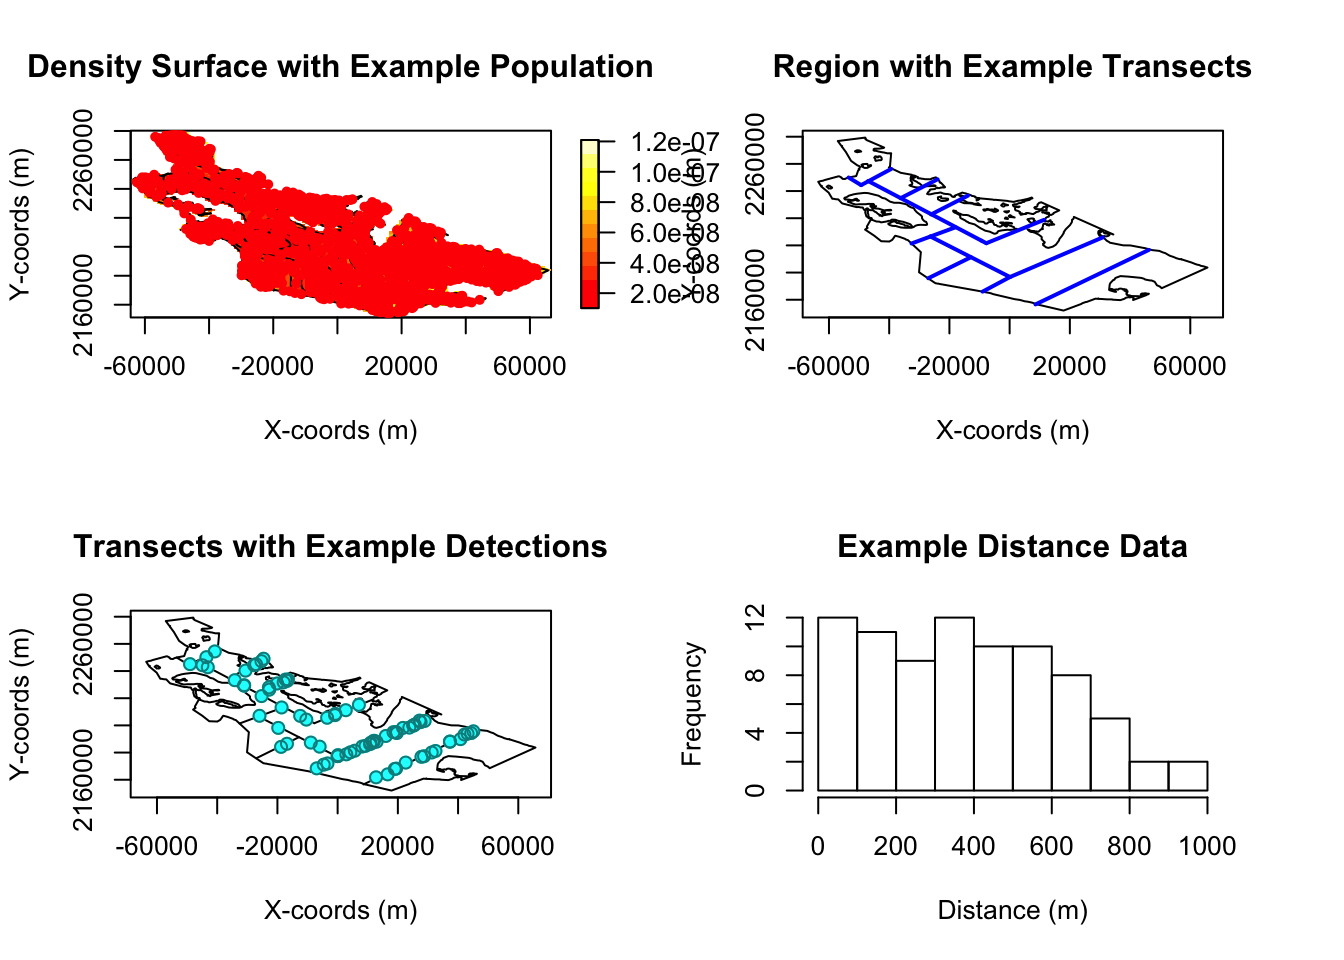 Region, population, transects, detections